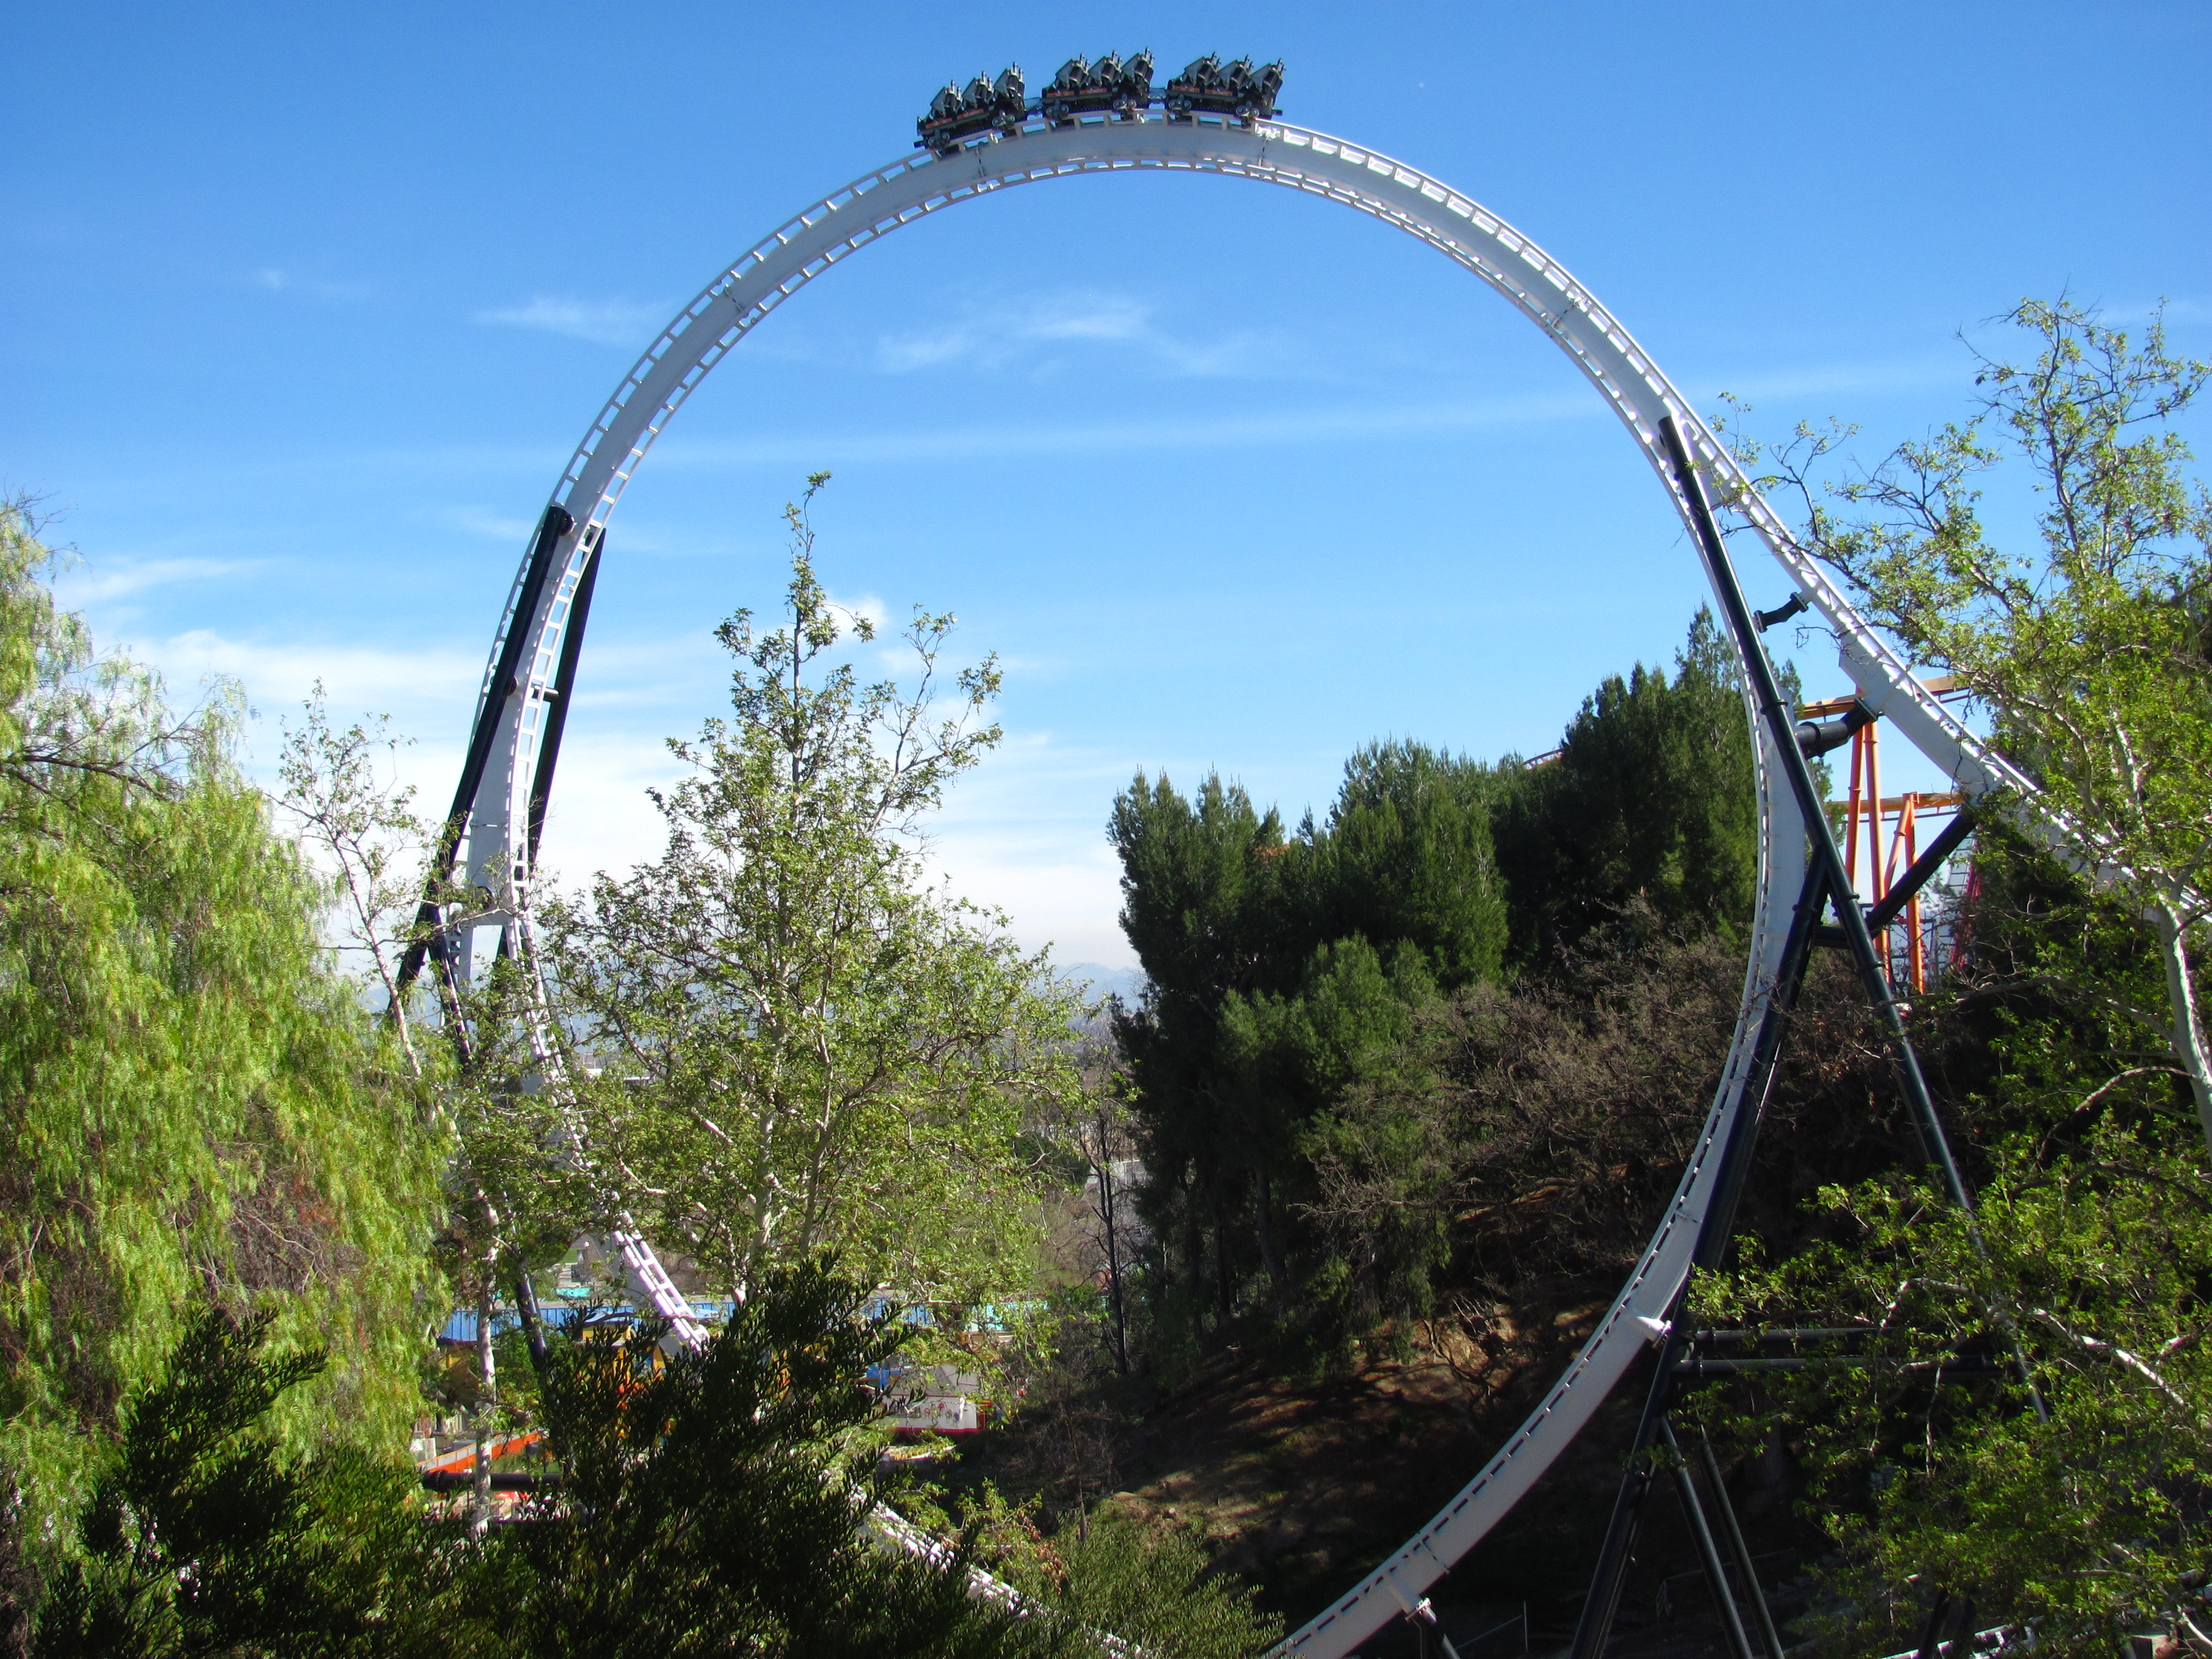 Launched roller coaster - Wikipedia